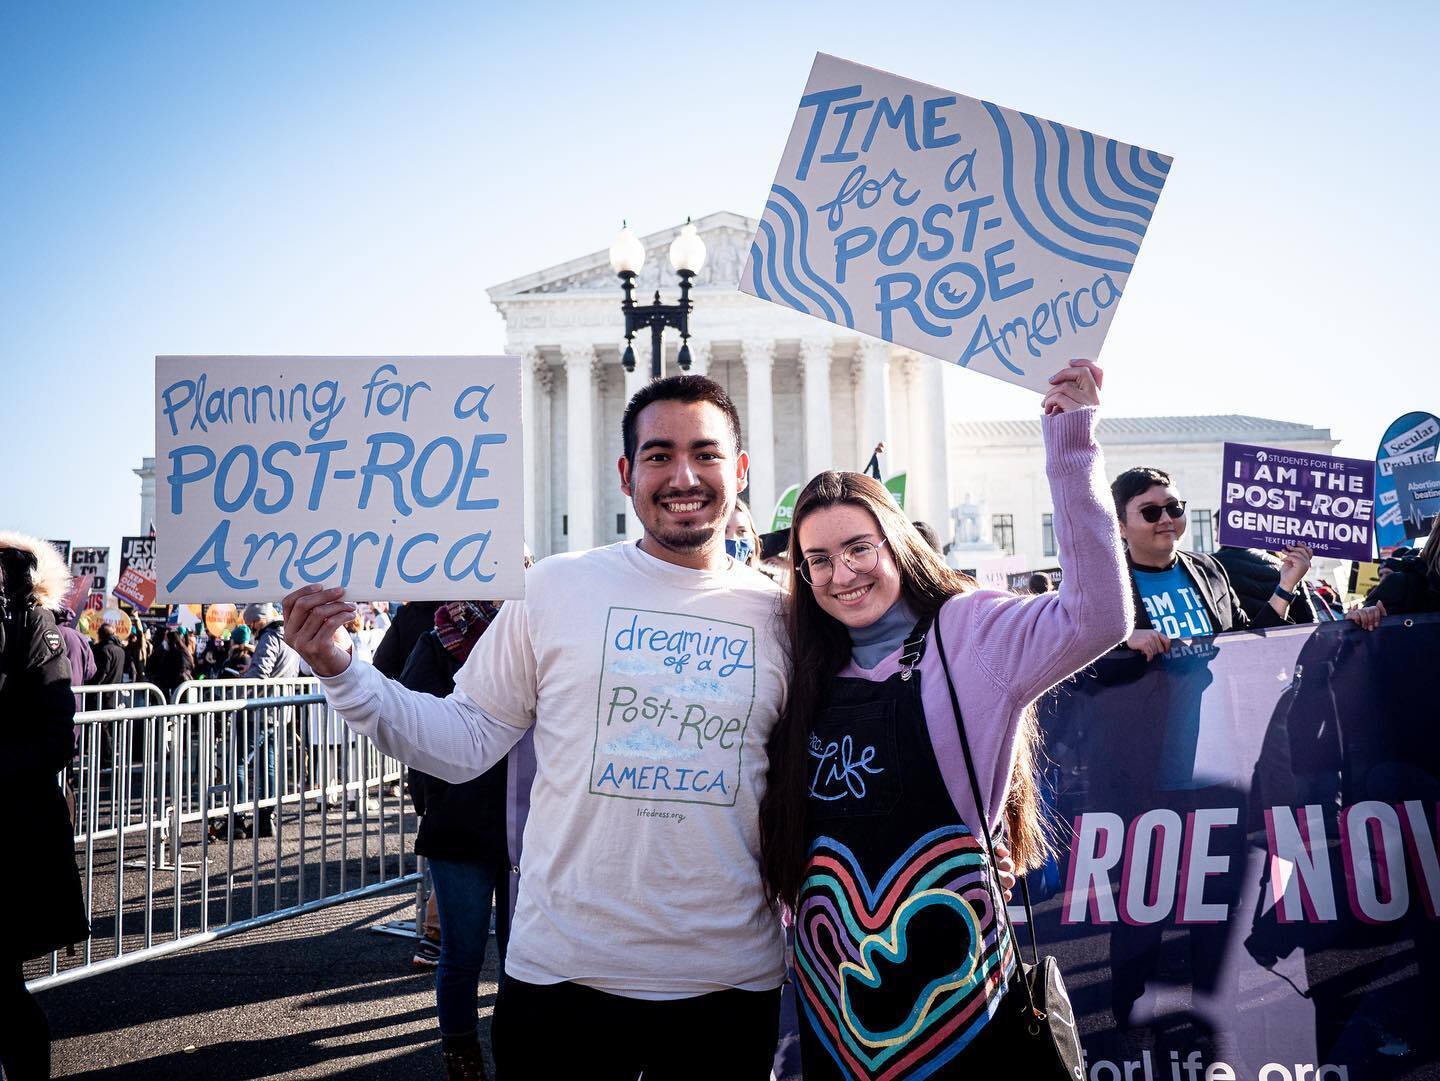 3.12.2021 – Pro-Life hopes palpable as Supreme Court hears case that could overturn Roe v. Wade